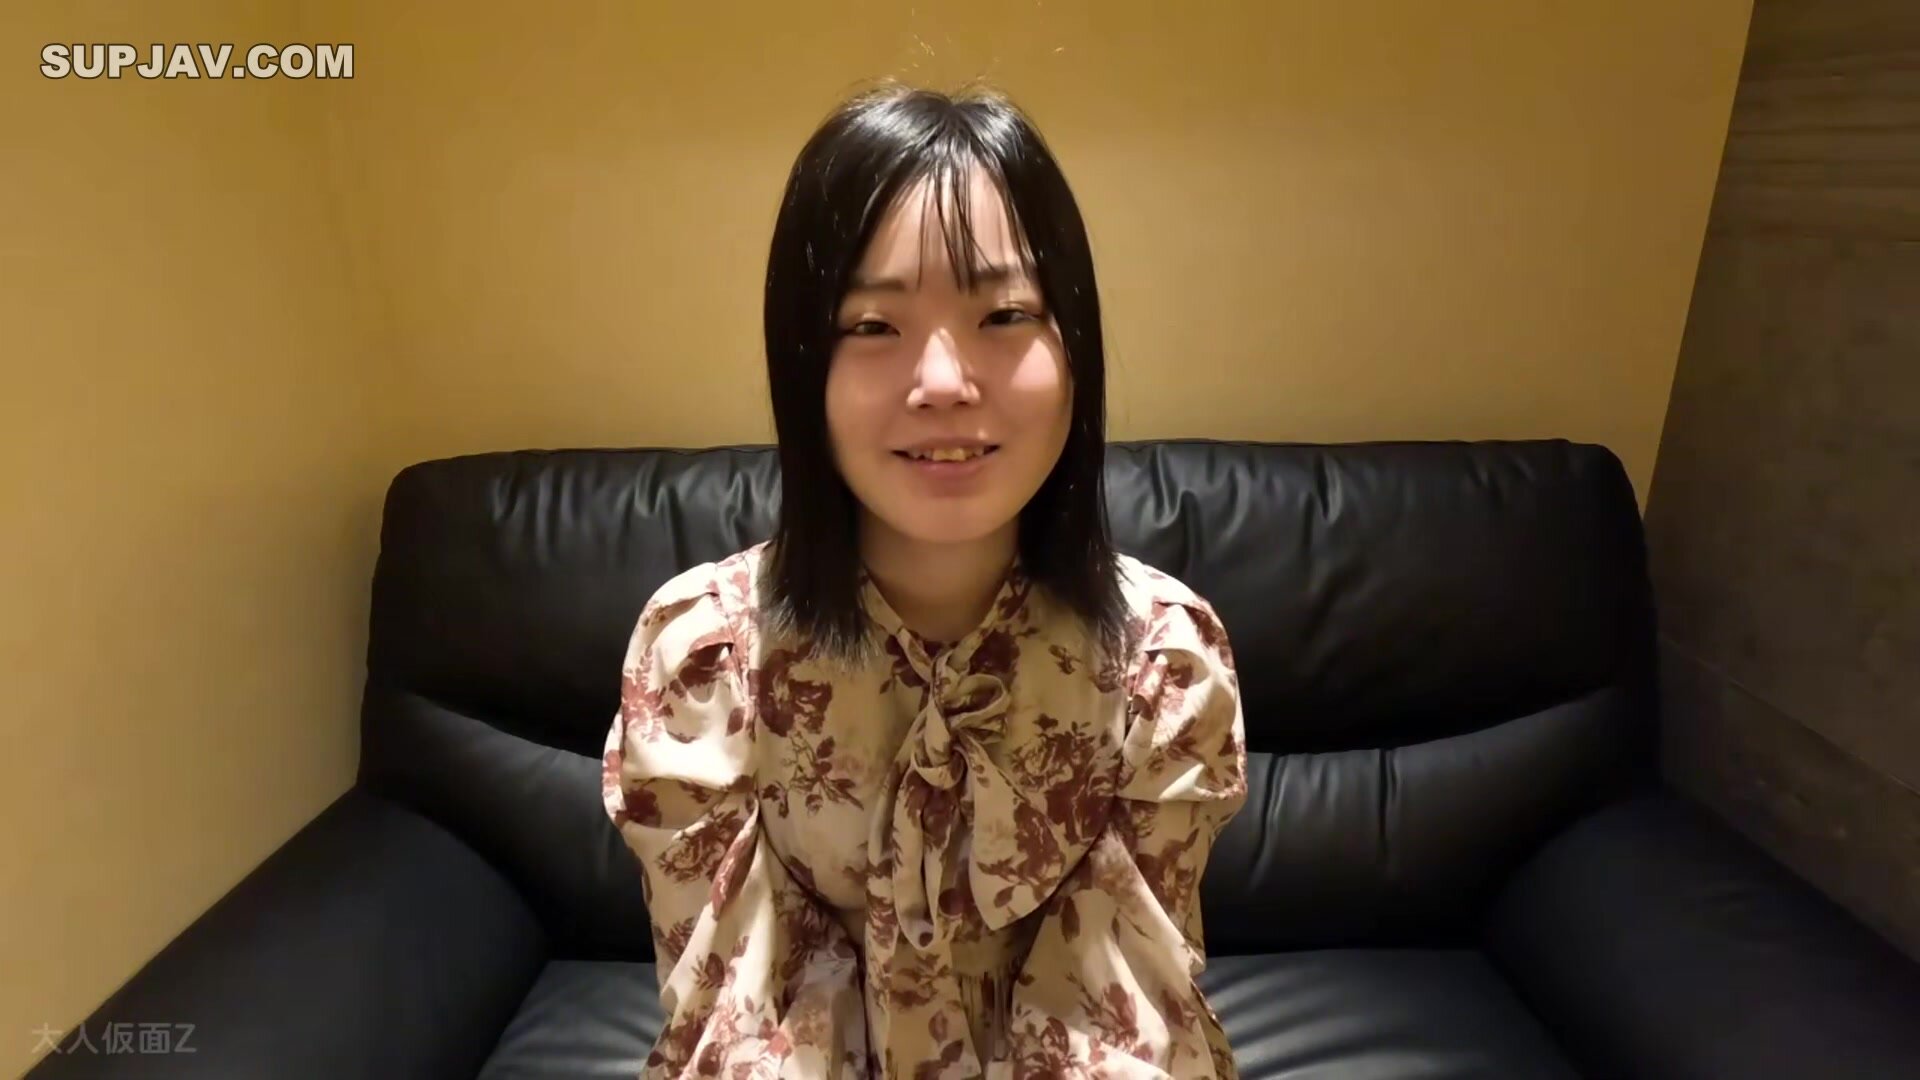 Ryo (23\) Anal development and writhing in agony with yam smearing or kayu torture. She completely fell in love with the sucking and sex massage that followed.